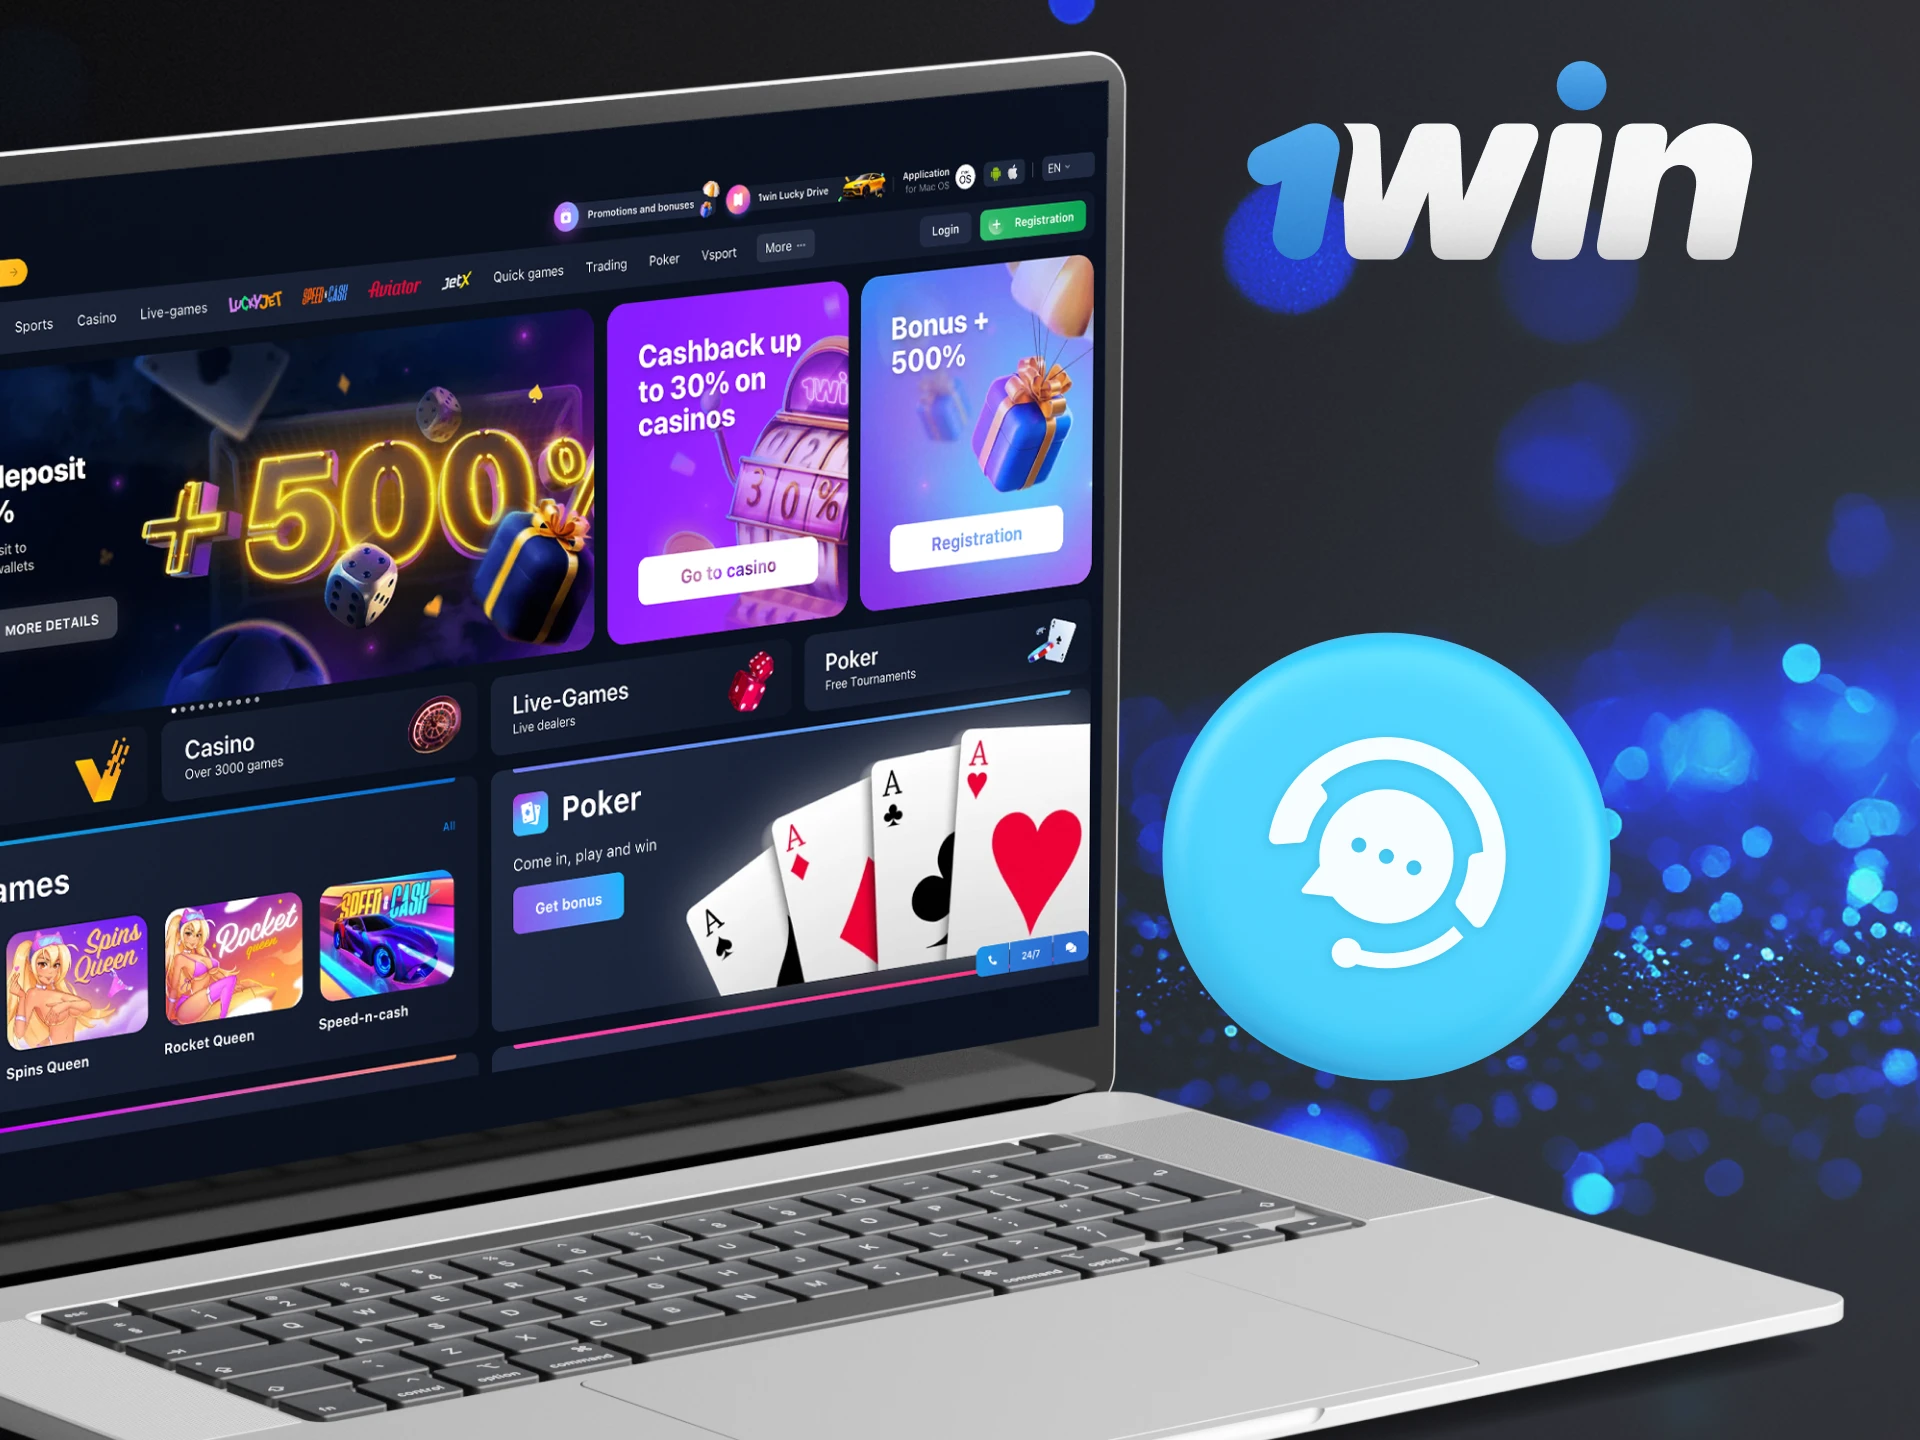 How can I contact technical support at 1win casino.